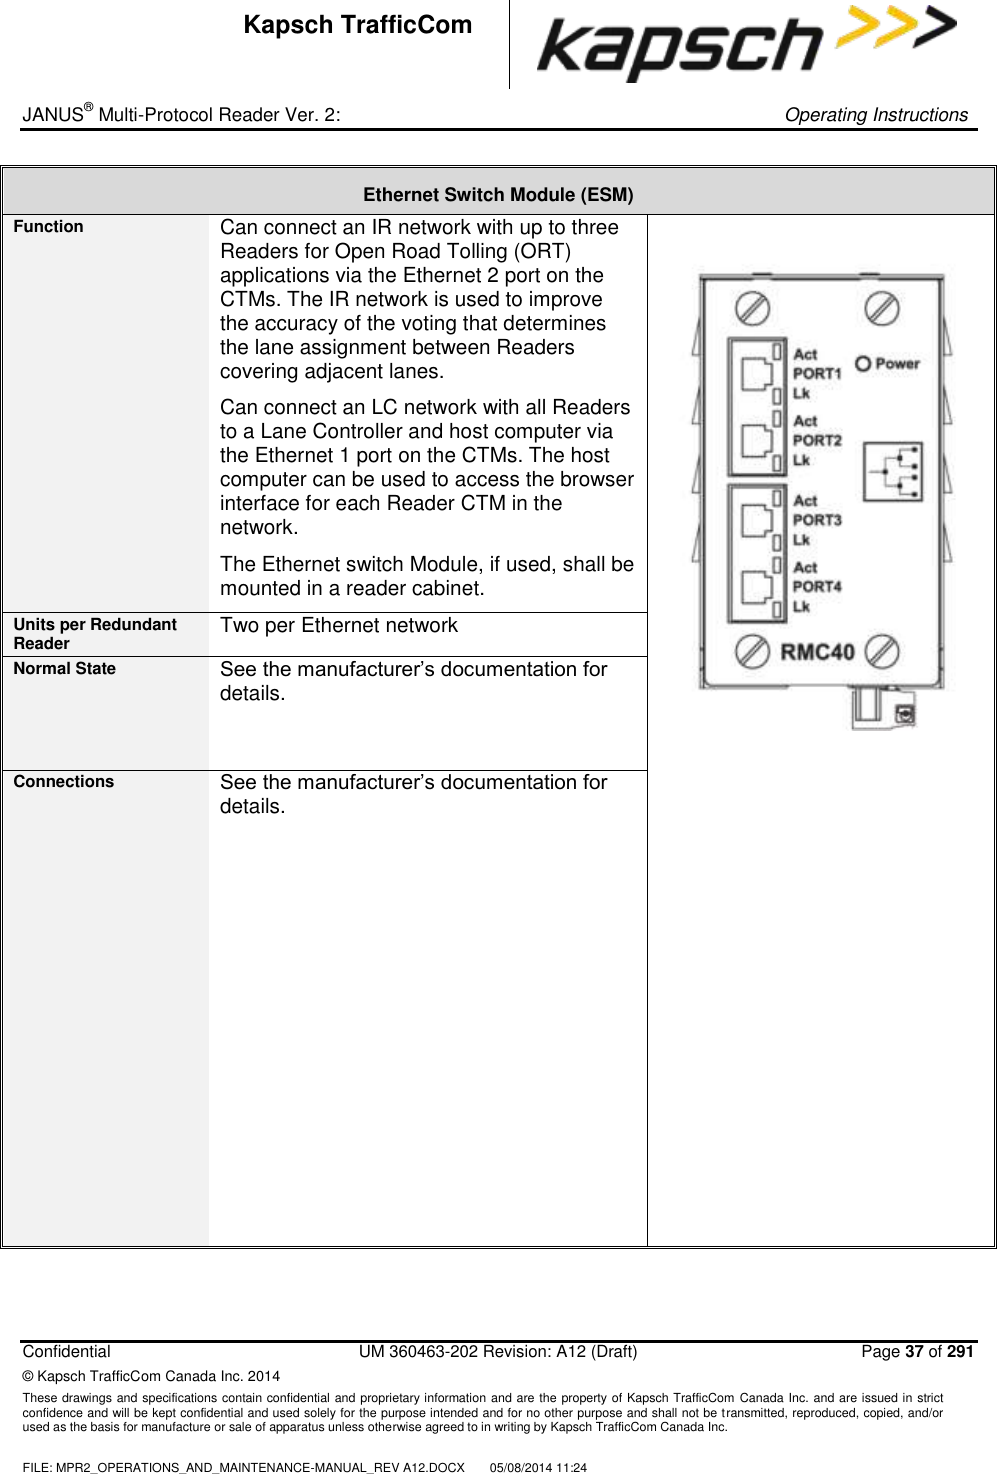 _ JANUS® Multi-Protocol Reader Ver. 2:     Operating Instructions  Confidential  UM 360463-202 Revision: A12 (Draft)   Page 37 of 291 © Kapsch TrafficCom Canada Inc. 2014 These drawings and specifications contain confidential and proprietary information and are the property of Kapsch TrafficCom  Canada Inc. and are issued in strict confidence and will be kept confidential and used solely for the purpose intended and for no other purpose and shall not be transmitted, reproduced, copied, and/or used as the basis for manufacture or sale of apparatus unless otherwise agreed to in writing by Kapsch TrafficCom Canada Inc.  FILE: MPR2_OPERATIONS_AND_MAINTENANCE-MANUAL_REV A12.DOCX  05/08/2014 11:24  Kapsch TrafficCom Ethernet Switch Module (ESM) Function Can connect an IR network with up to three Readers for Open Road Tolling (ORT) applications via the Ethernet 2 port on the CTMs. The IR network is used to improve the accuracy of the voting that determines the lane assignment between Readers covering adjacent lanes.  Can connect an LC network with all Readers to a Lane Controller and host computer via the Ethernet 1 port on the CTMs. The host computer can be used to access the browser interface for each Reader CTM in the network. The Ethernet switch Module, if used, shall be mounted in a reader cabinet.  Units per Redundant Reader Two per Ethernet network Normal State See the manufacturer’s documentation for details. Connections See the manufacturer’s documentation for details.   